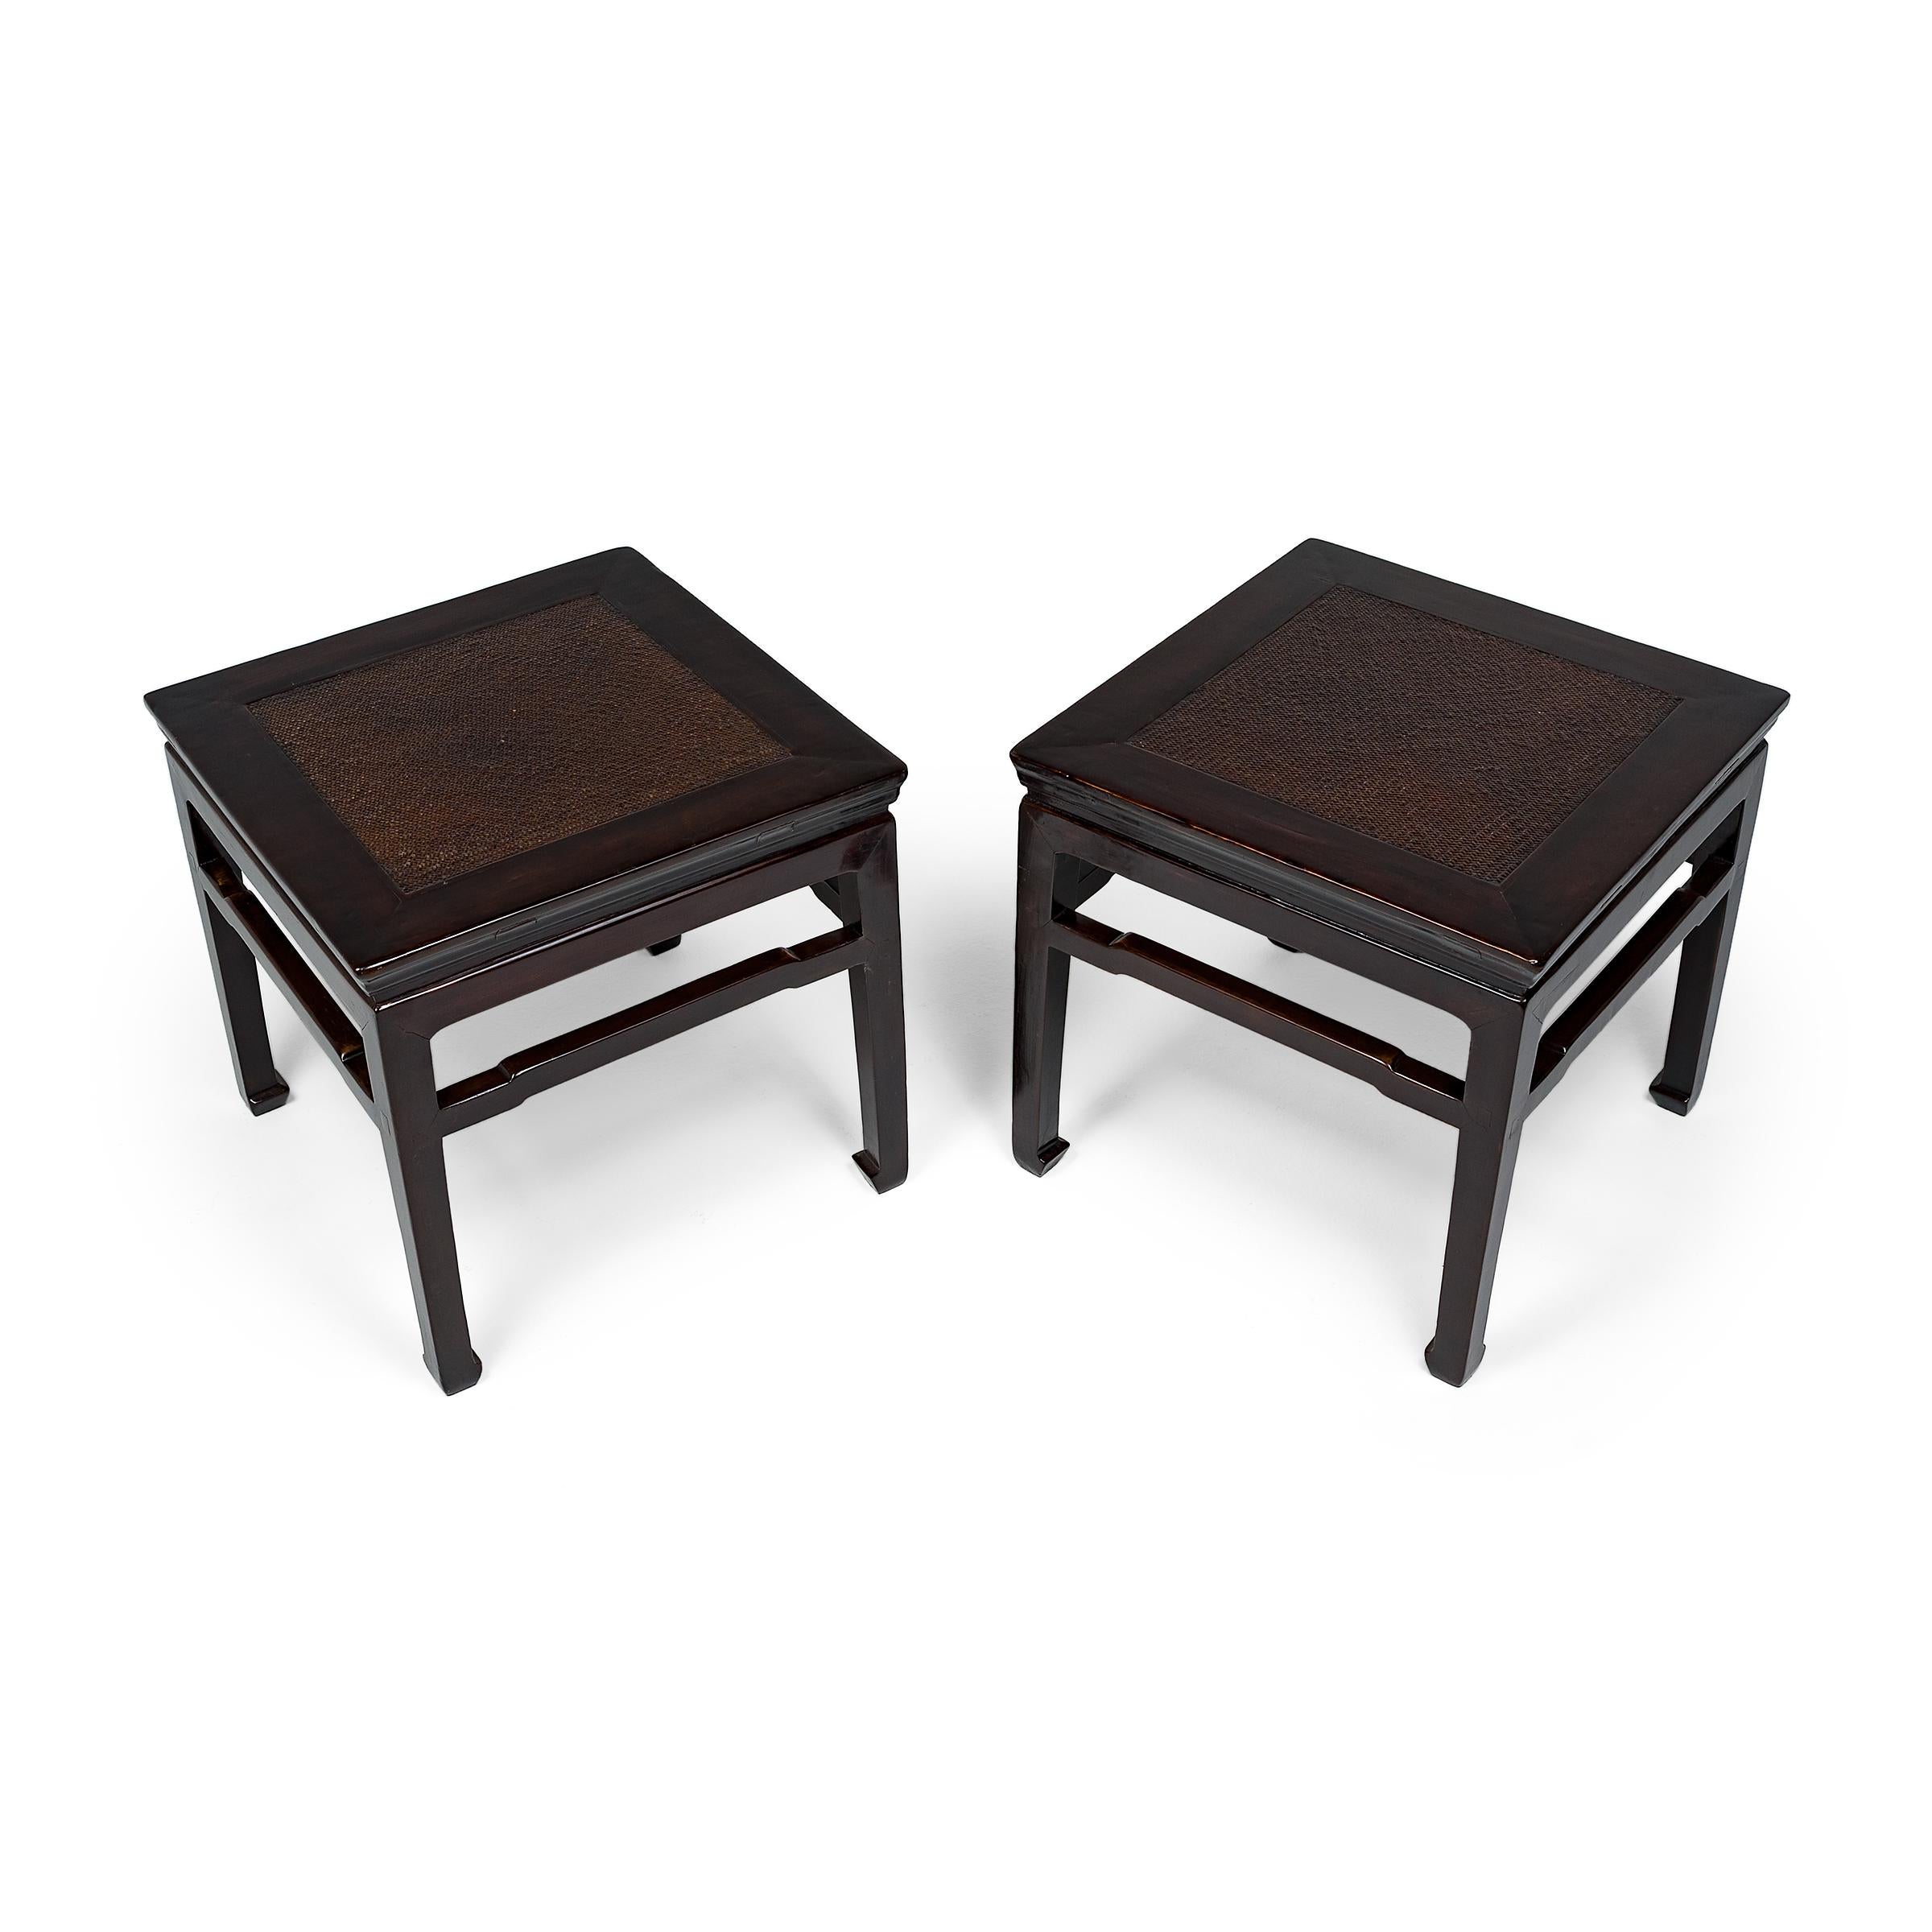 These 19th-century square stools from Shanxi province are elegantly crafted in the classical Chinese style with simple lines and balanced proportions. This form of square stool, or fang deng, was a versatile seating option used throughout a